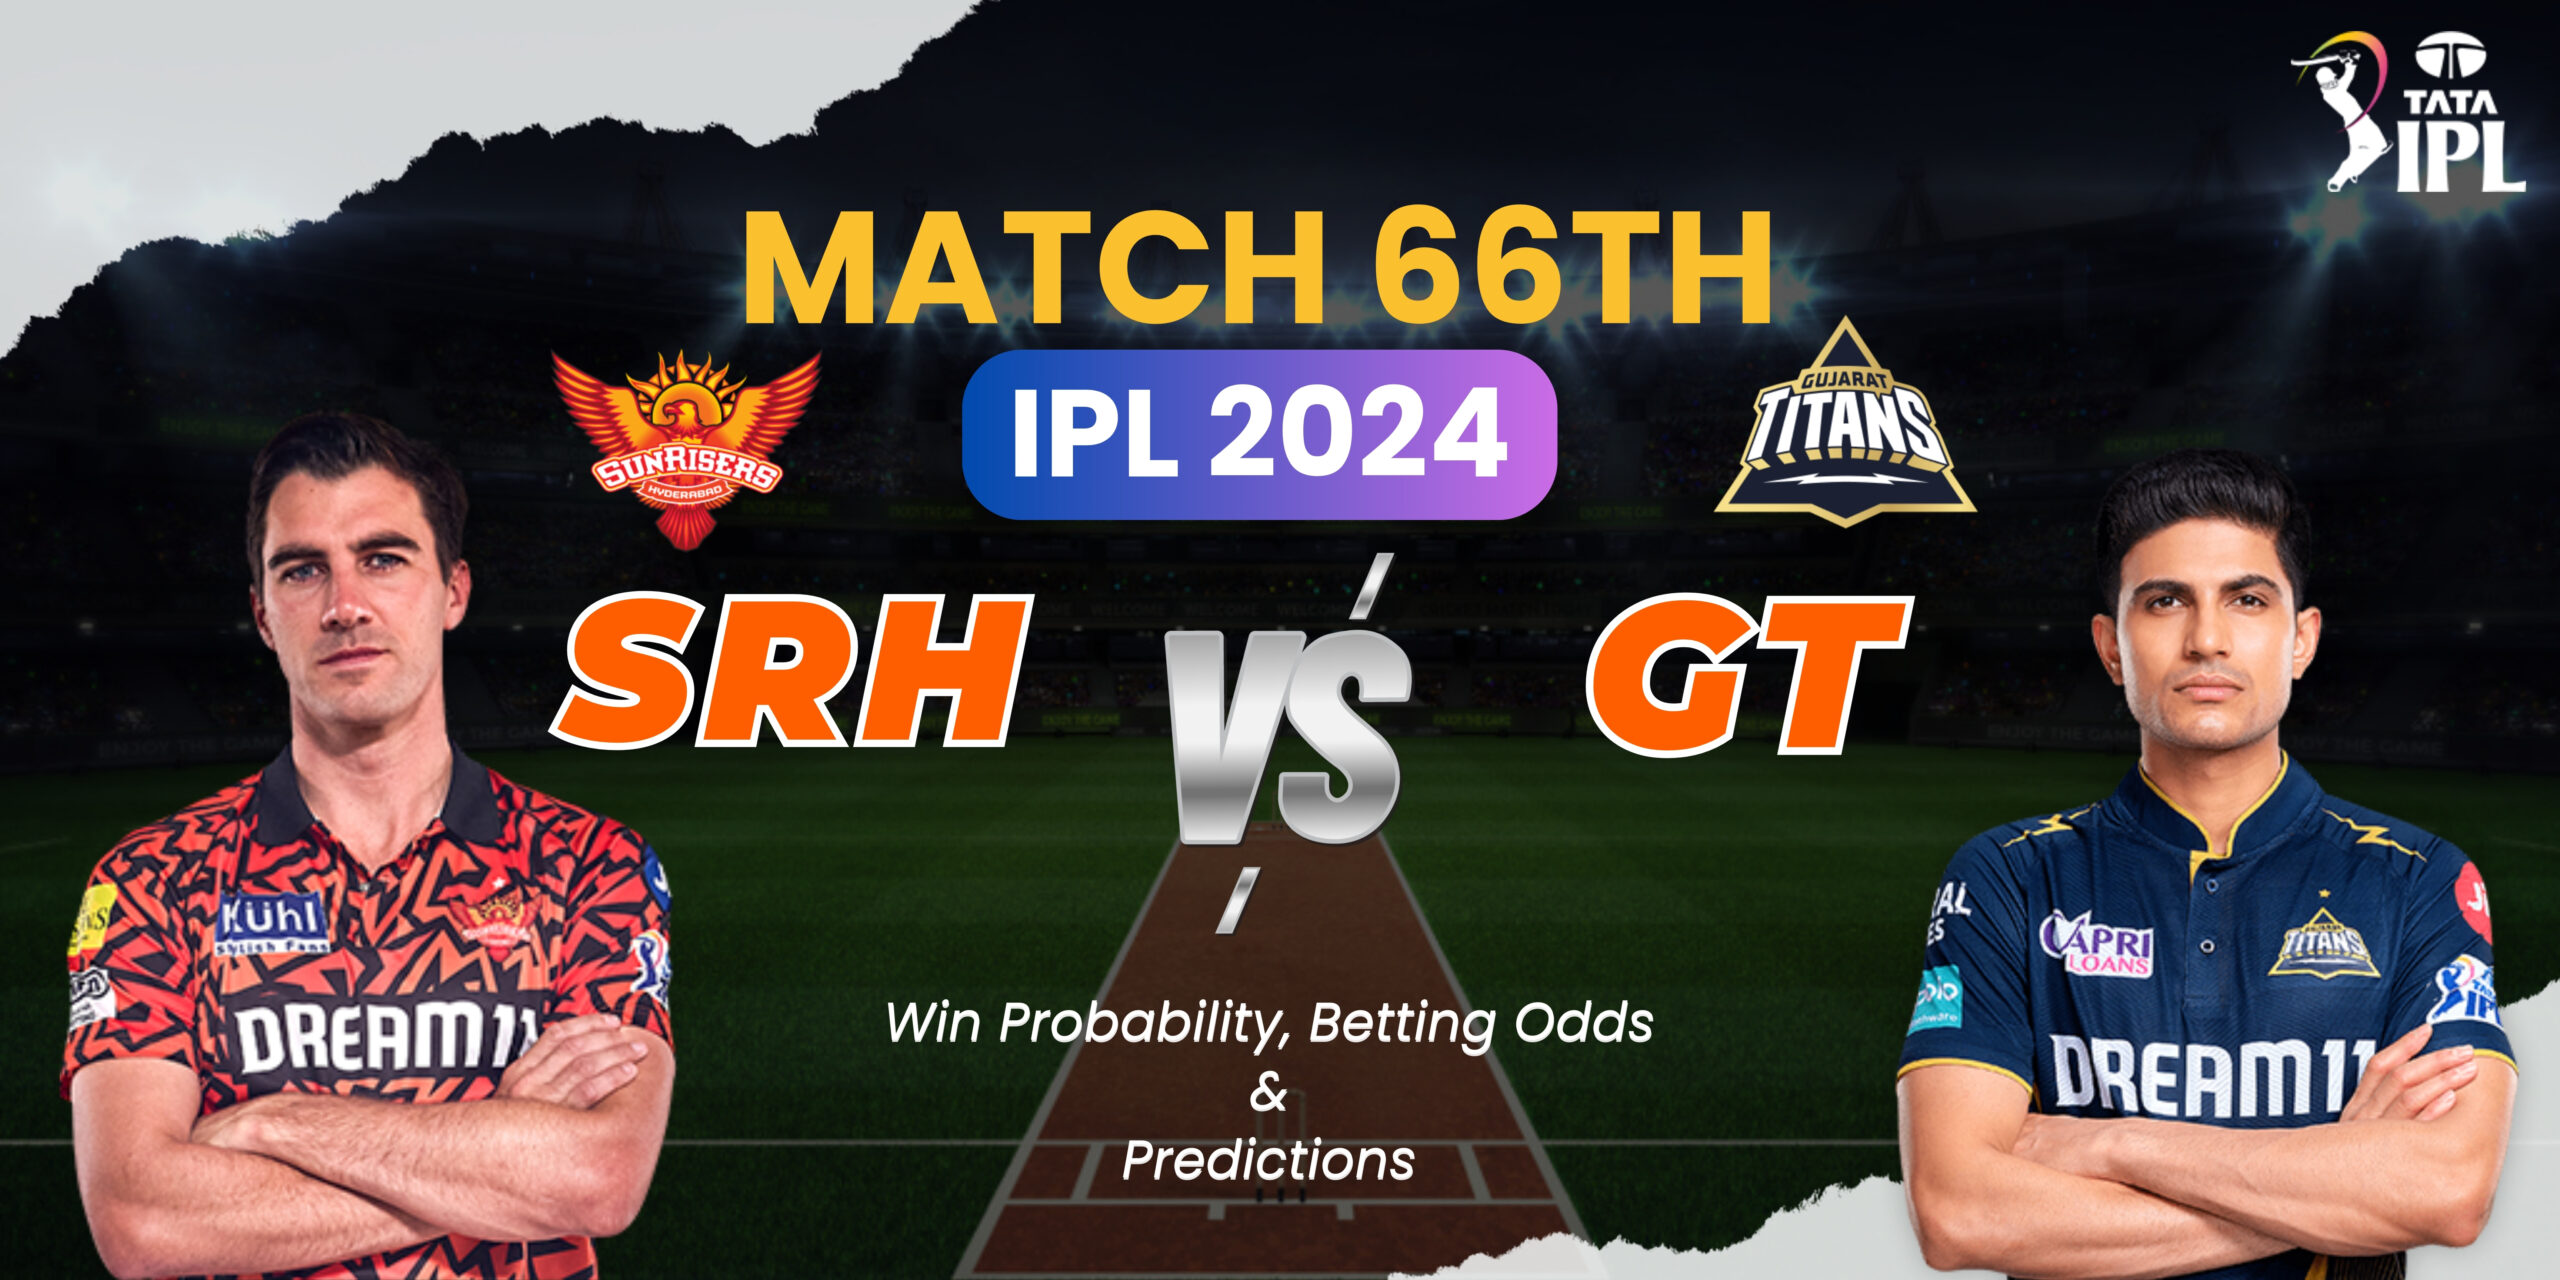 SRH vs GT Match 66th, IPL 2024: Win Probability, Betting Odds And Predictions